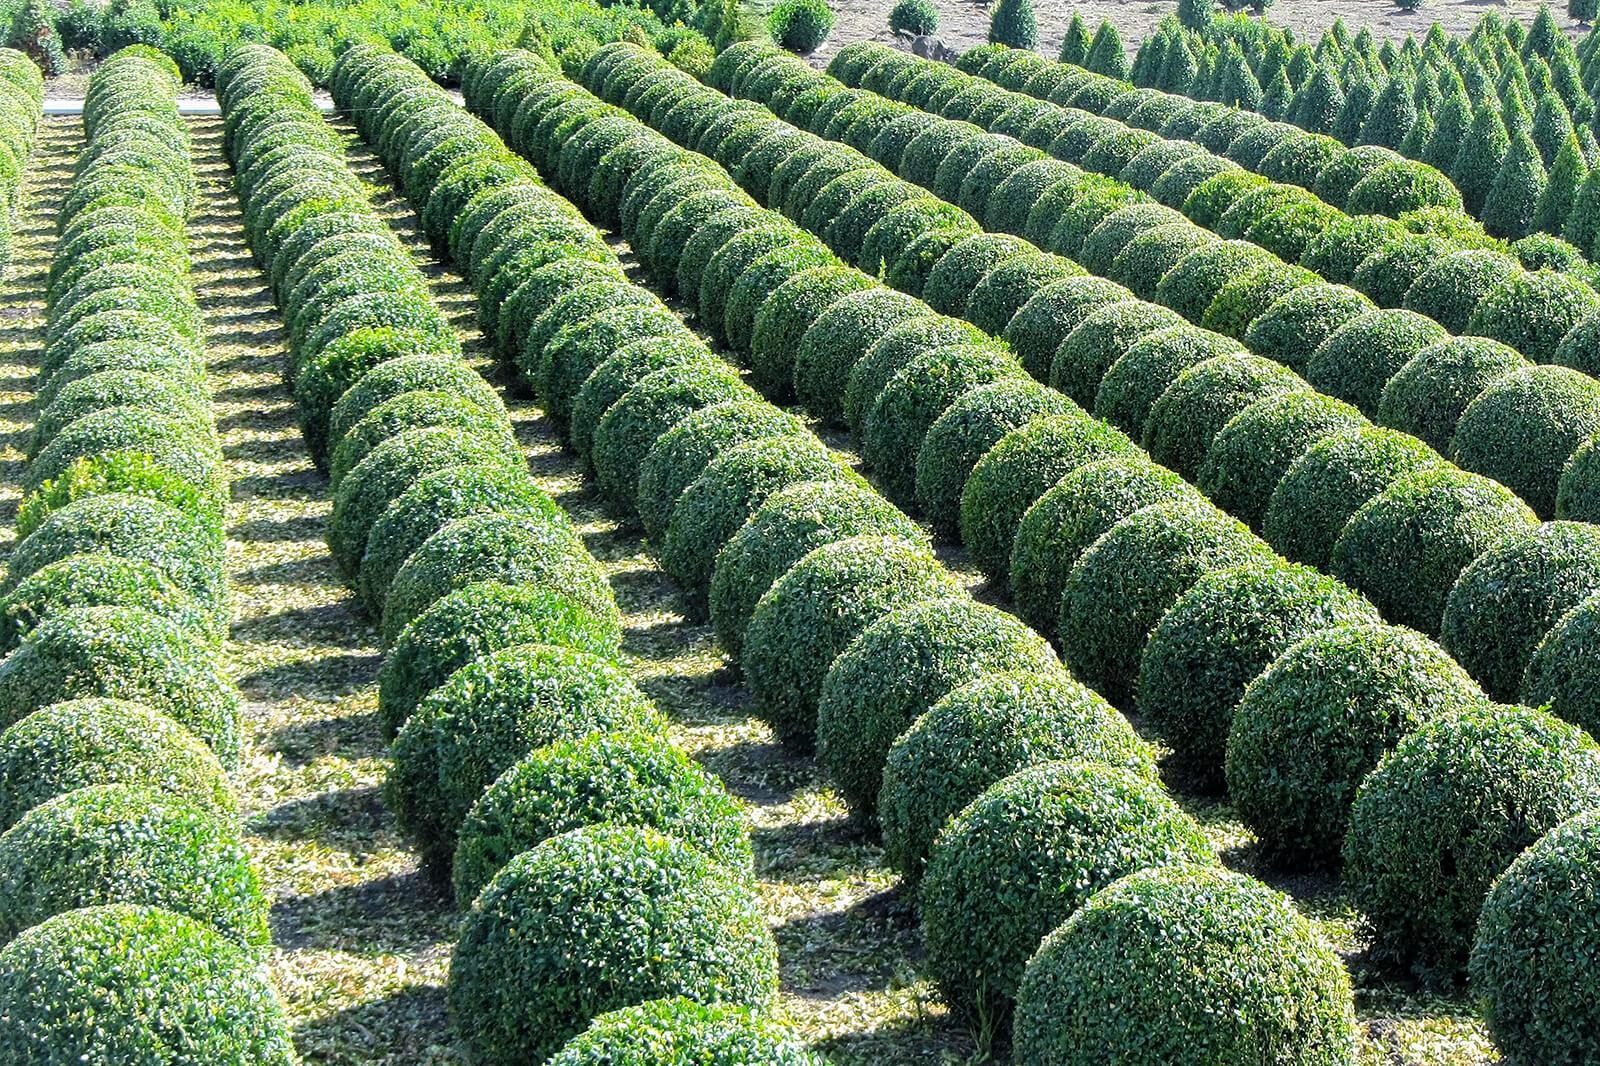 United States amends entry requirements for imports of boxwood, euonymus and holly from Canada